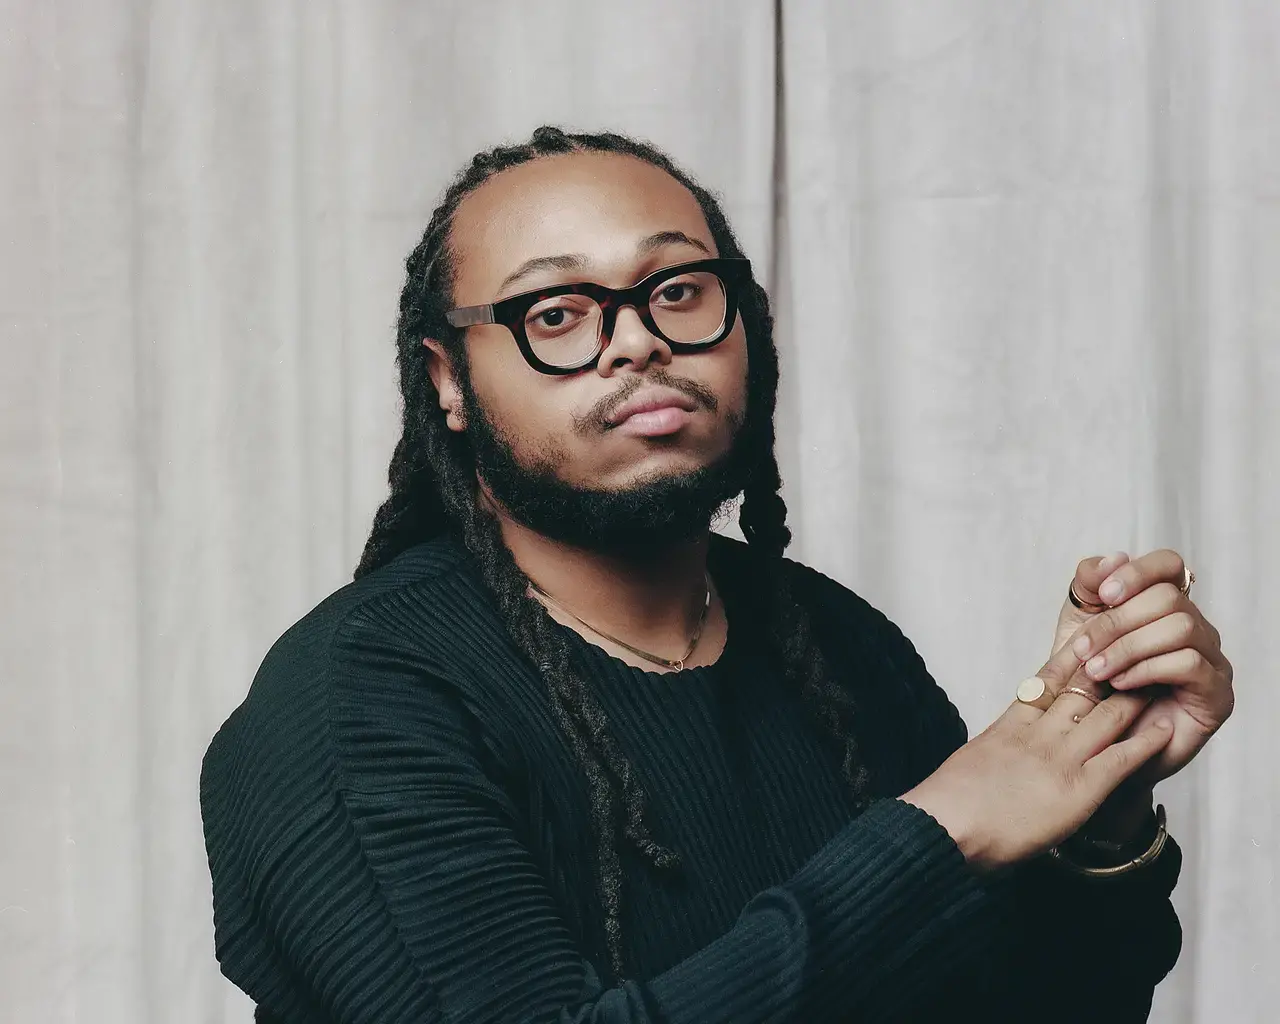 A portrait shot of saxaphone player Immanuel Wilkins wearing a black ribbed shirt, dark rimmed glasses, and long black twists.